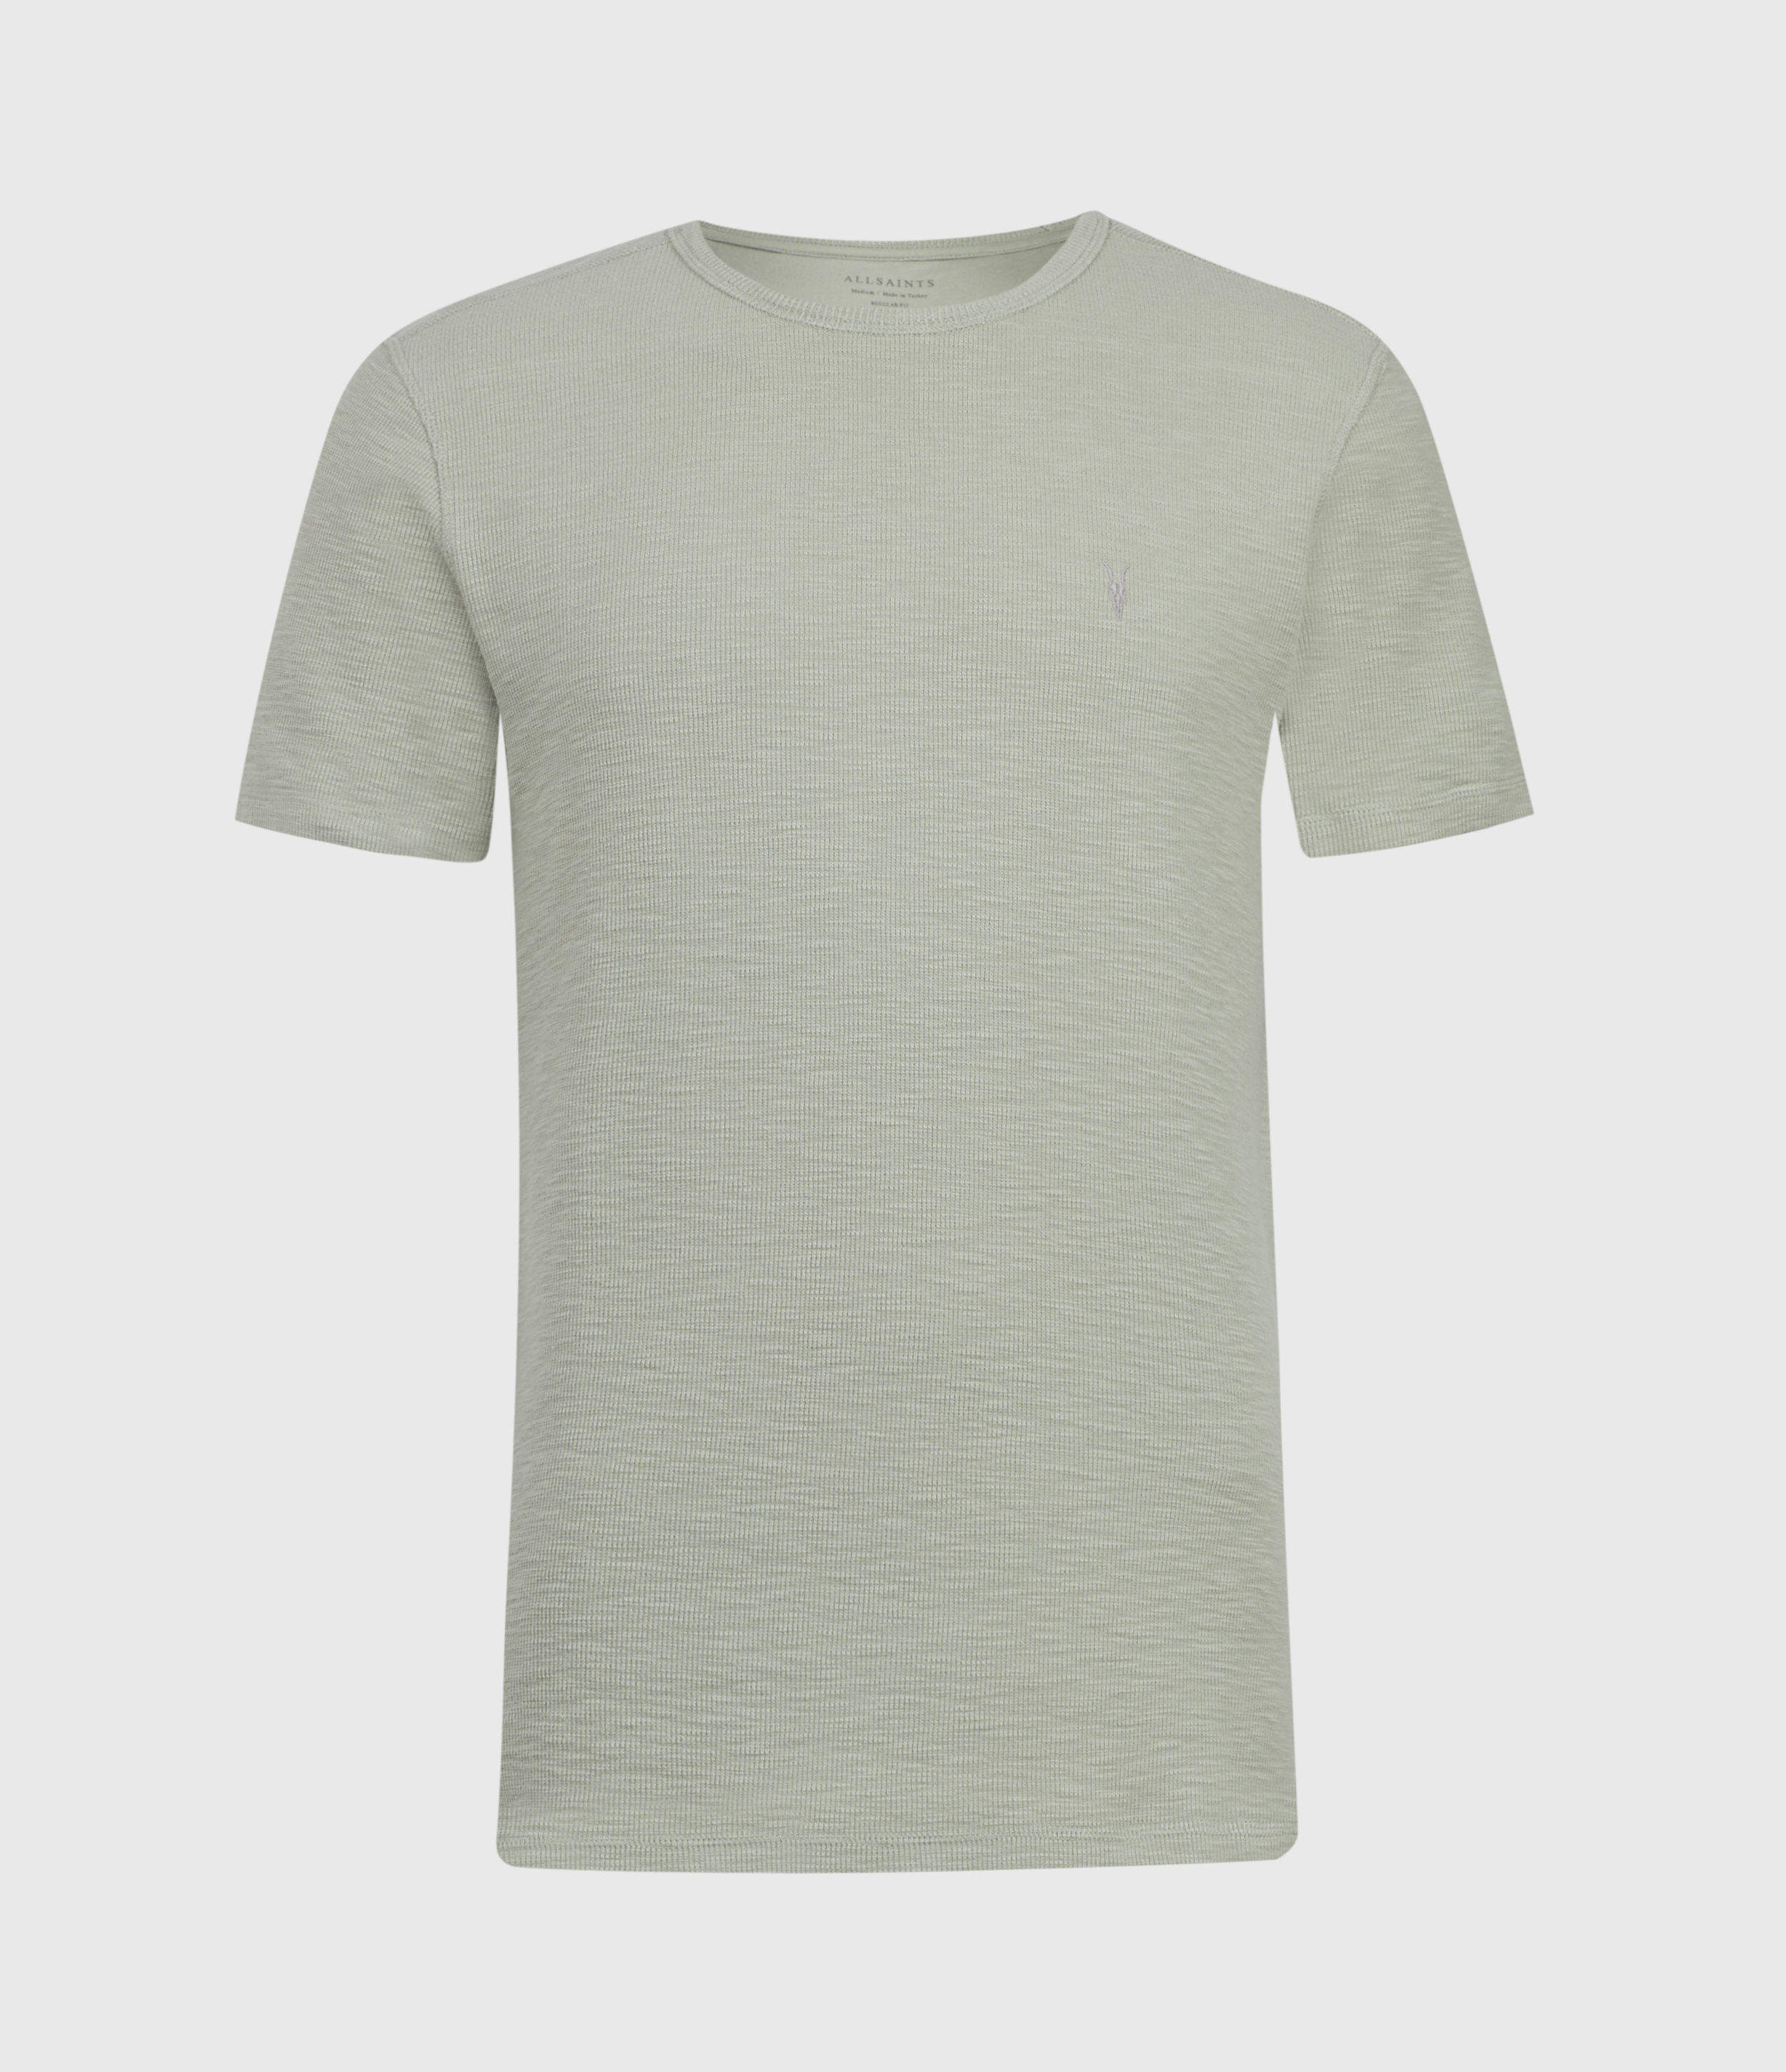 Allsaints Mens Muse Crew T-shirt In Thyme Green